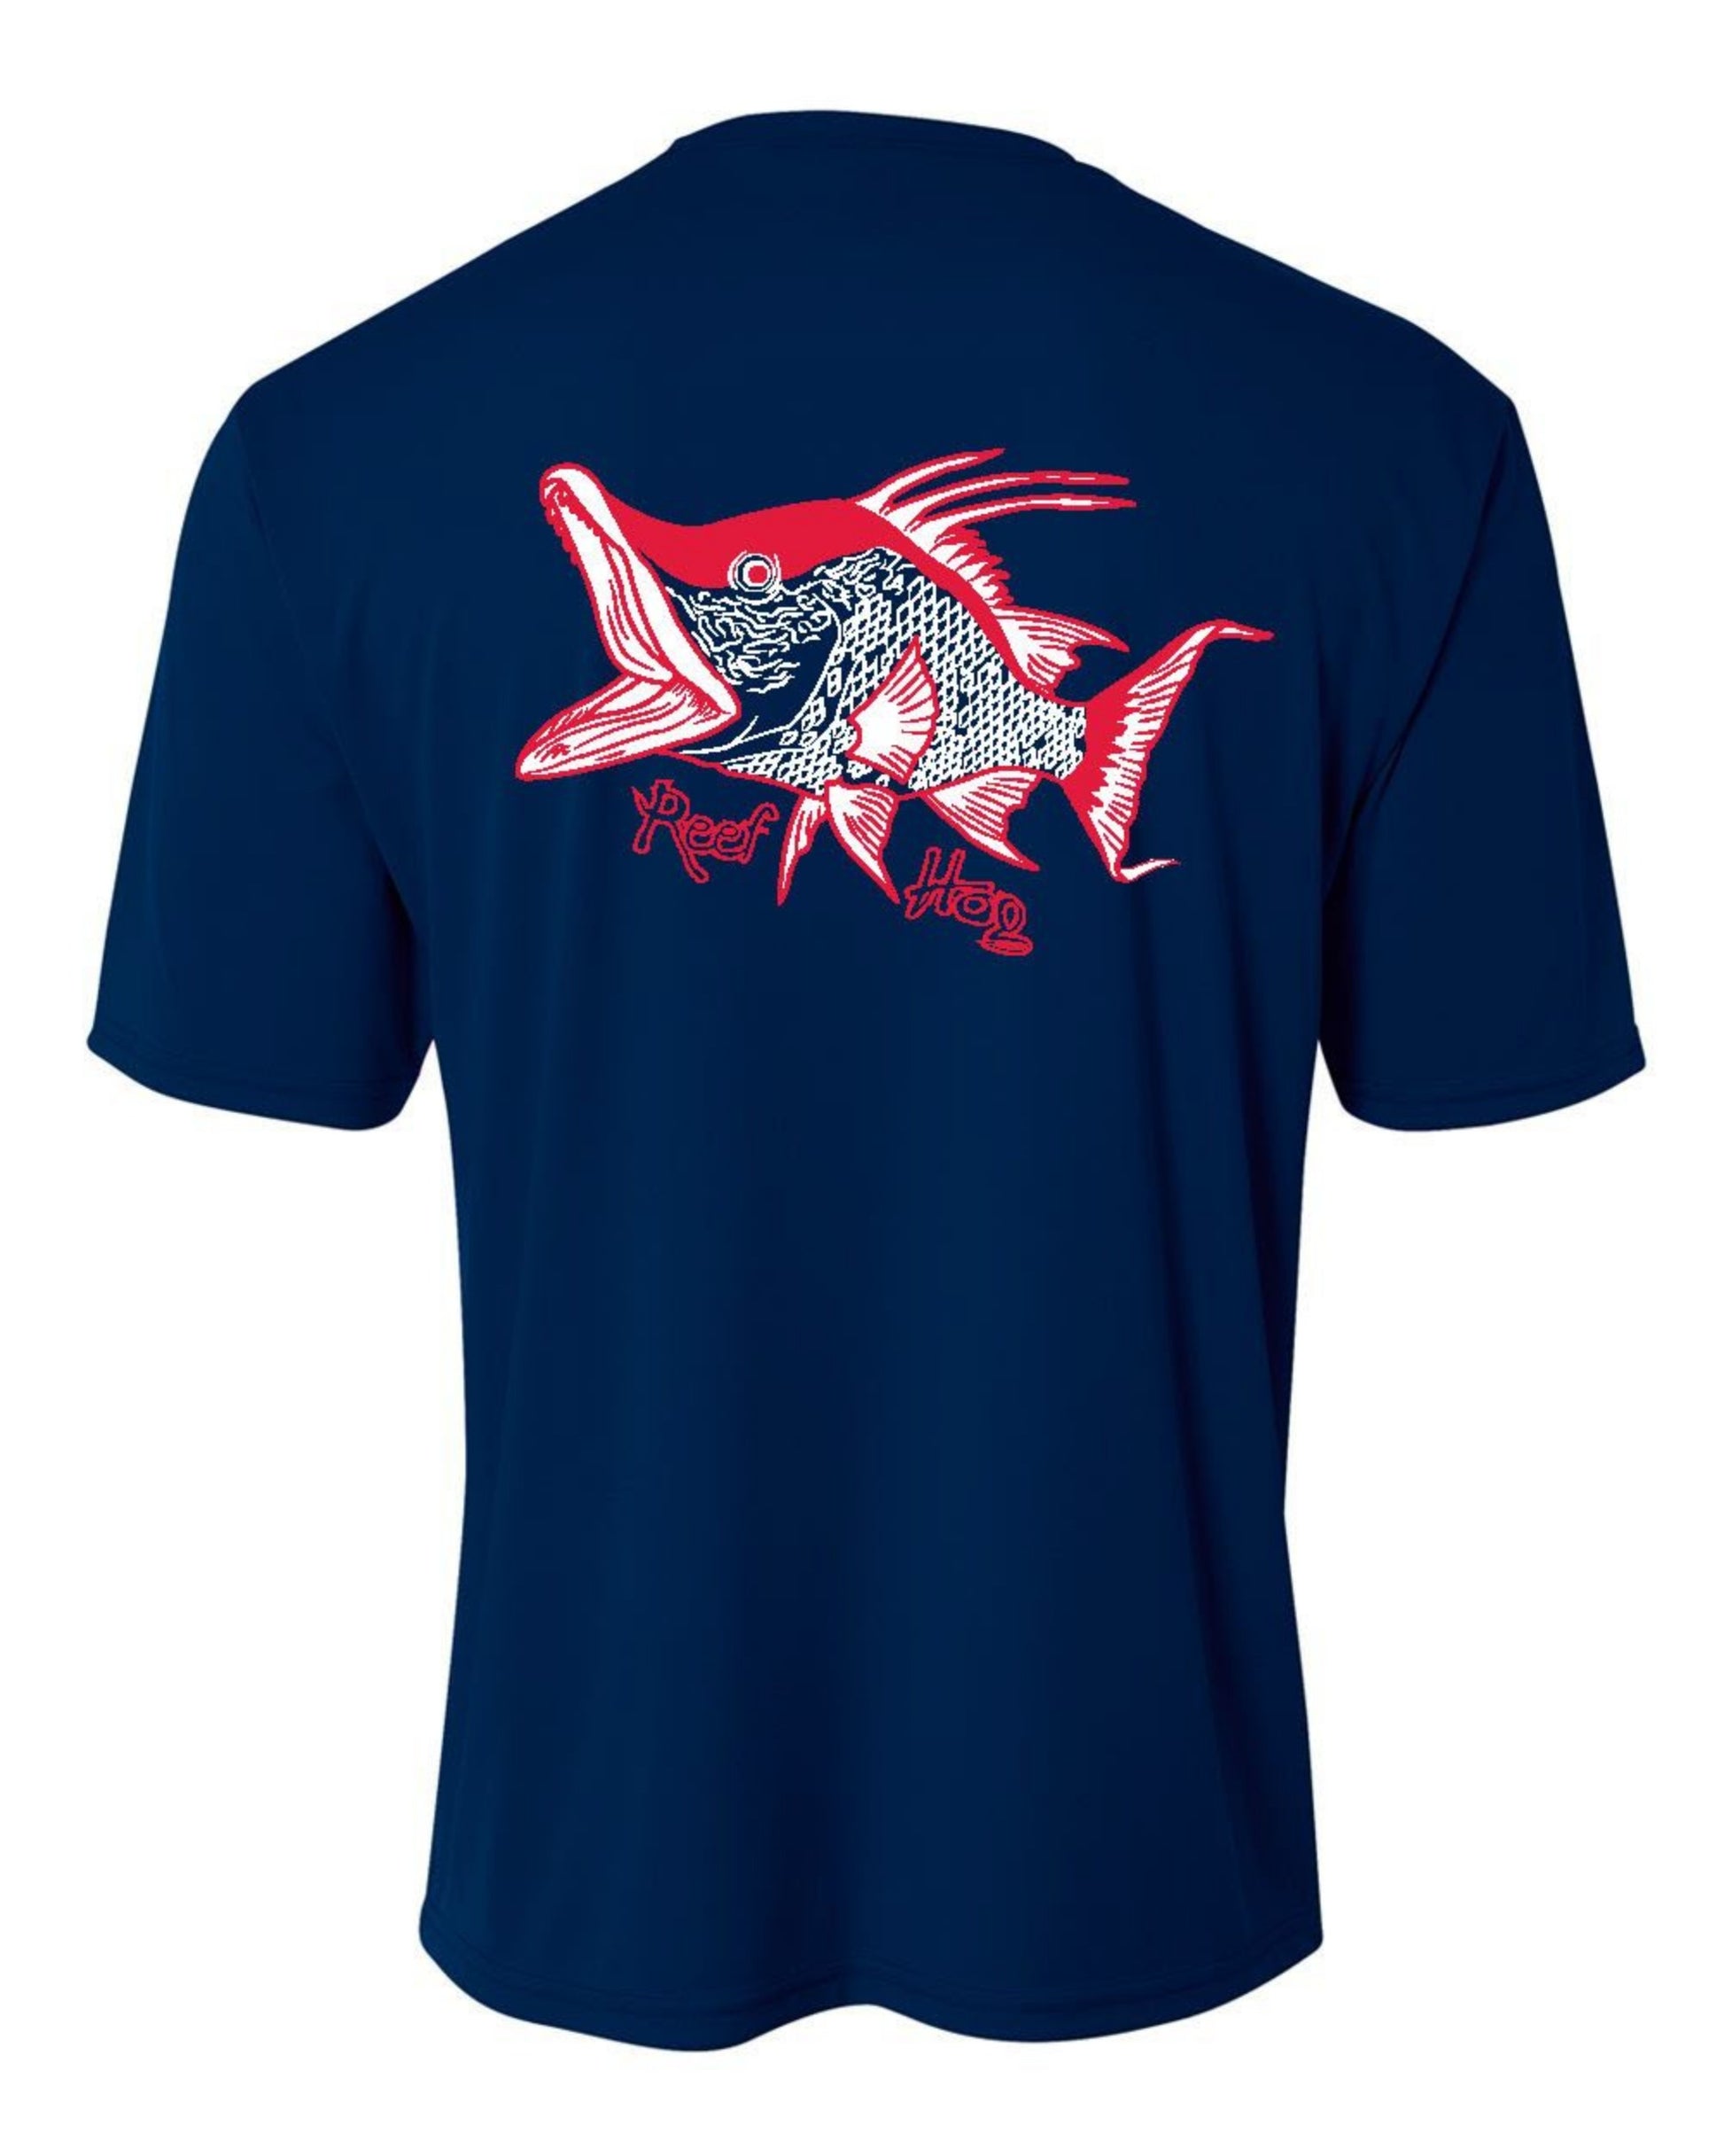 Reef and Reel Performance Fishing Fish | Essential T-Shirt